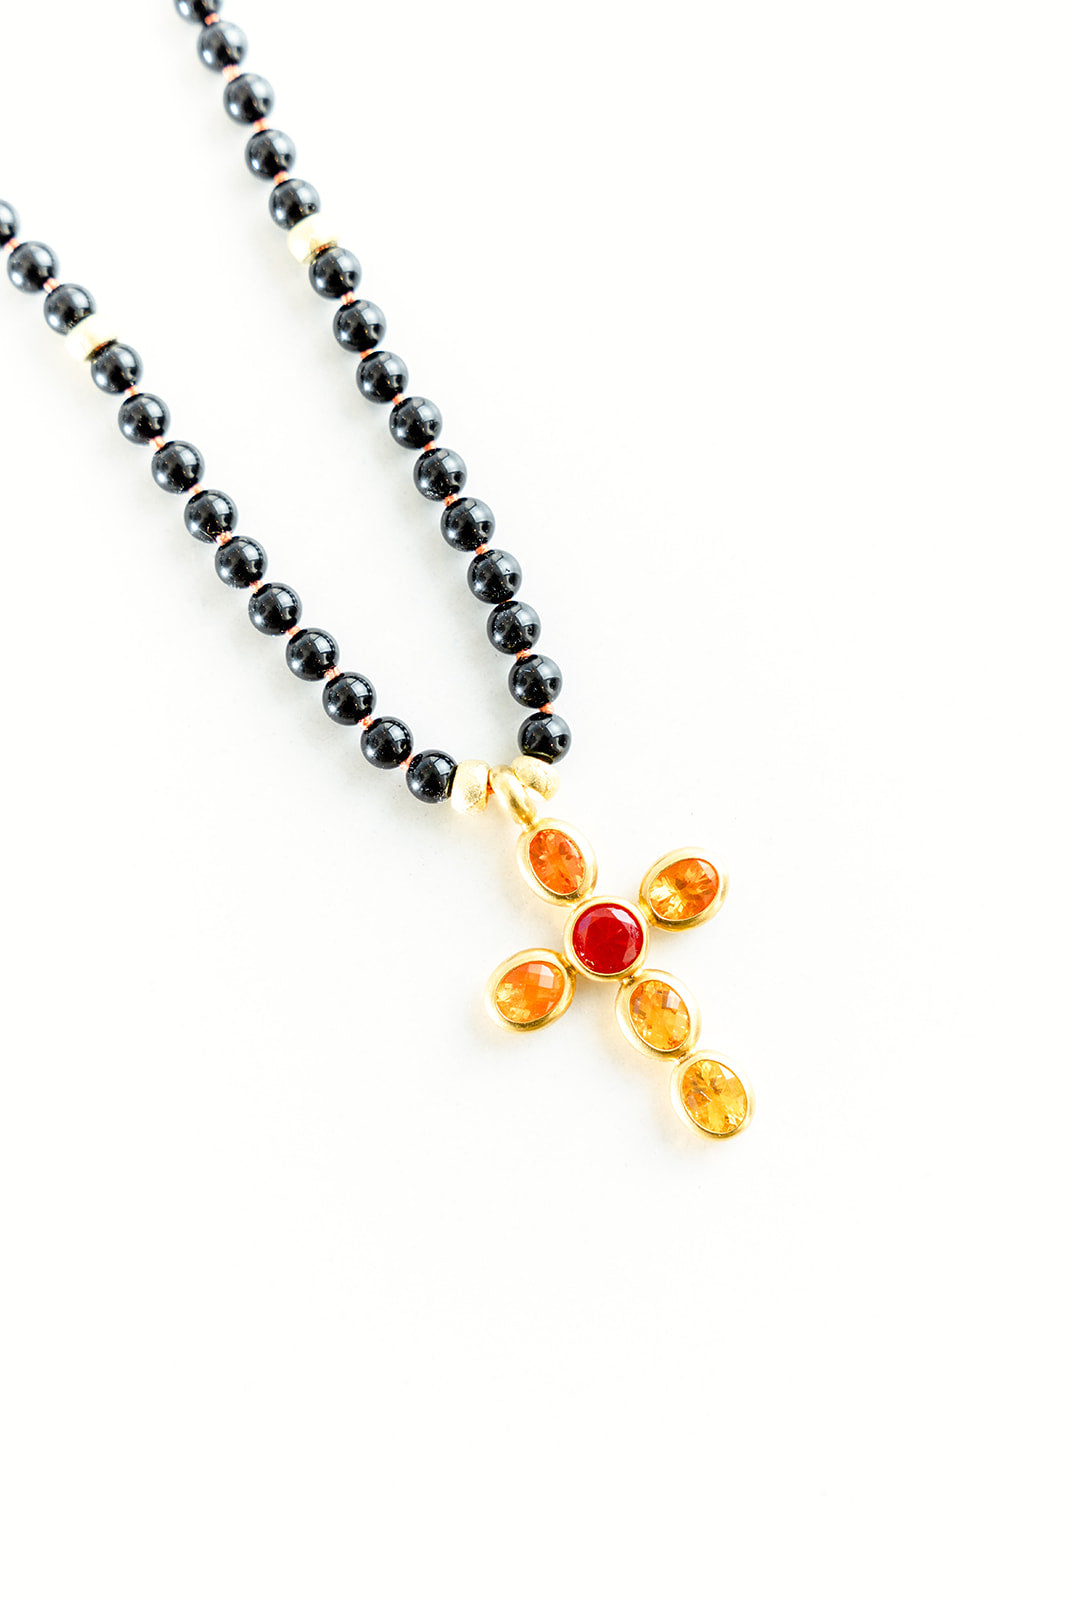 30" Black Onyx Necklace with 22K Yellow Gold Faceted Orange and Yellow and Blood Orange Fire Opal Cross